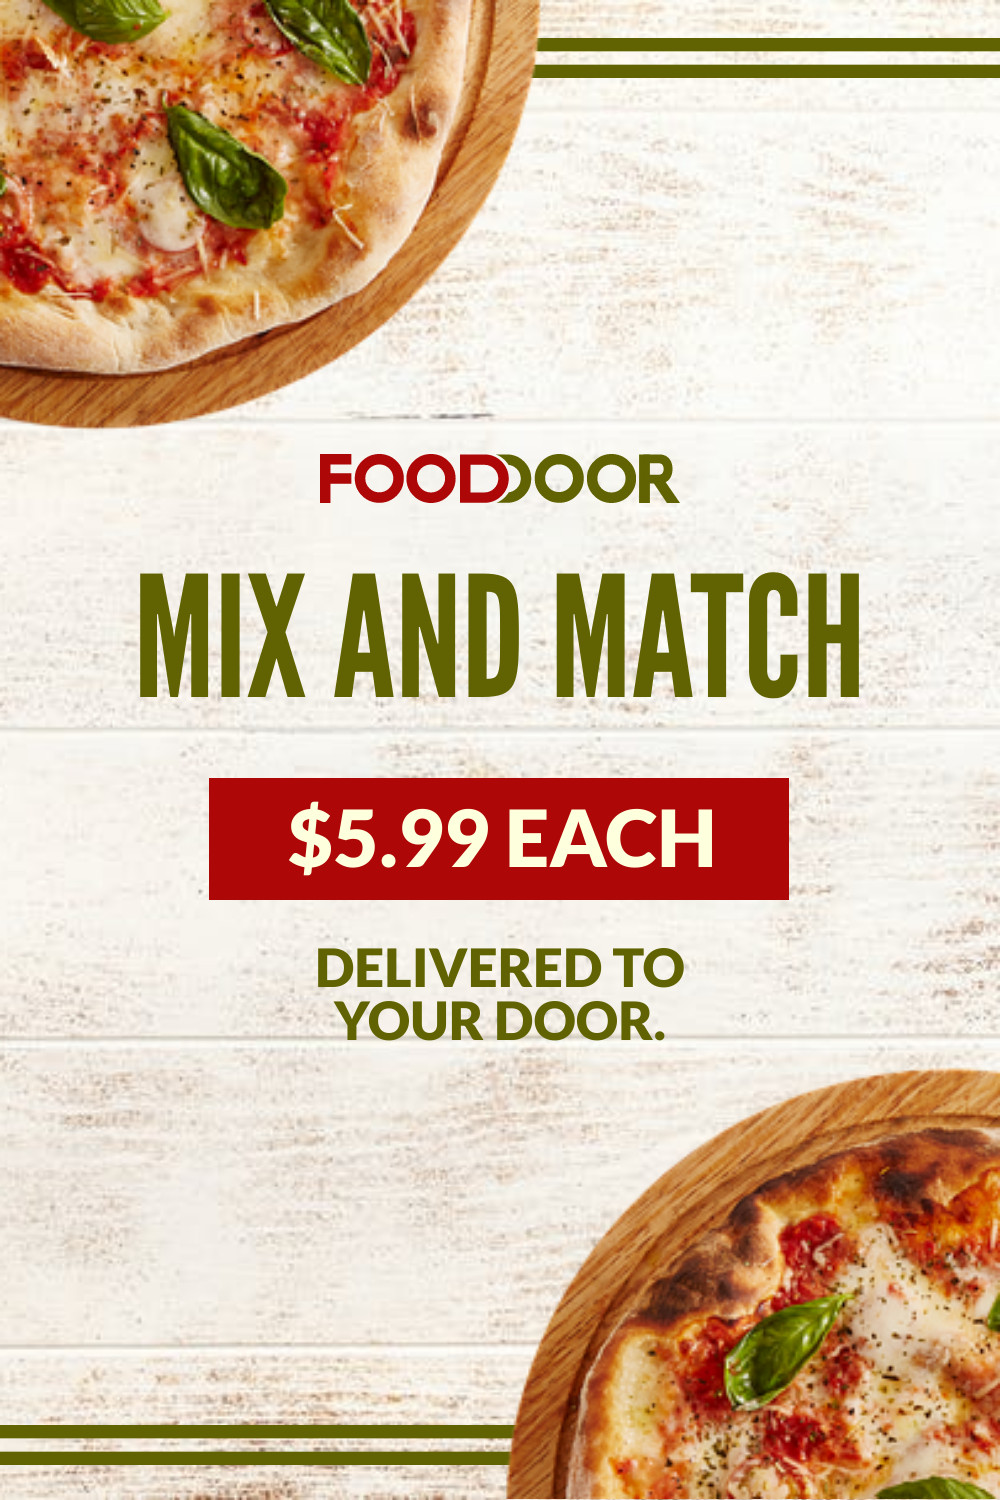 Mix and Match Pizza Inline Rectangle 300x250